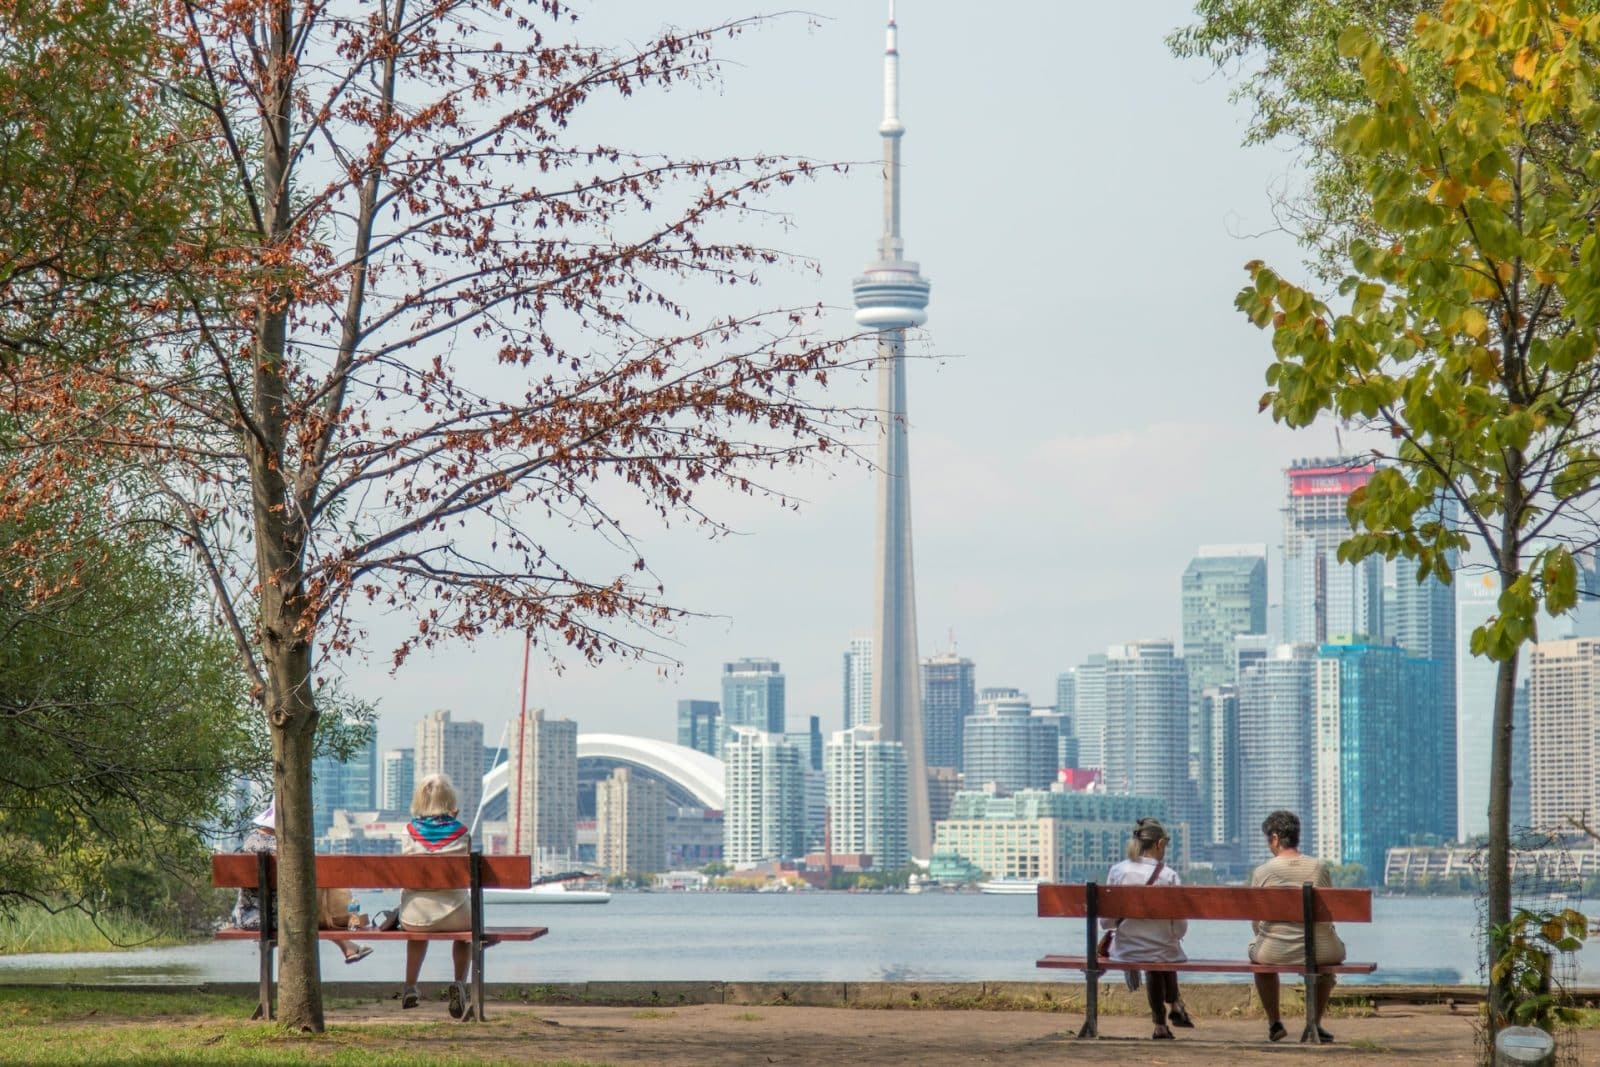 The Top 21 Must-See Tourist Attractions in Toronto